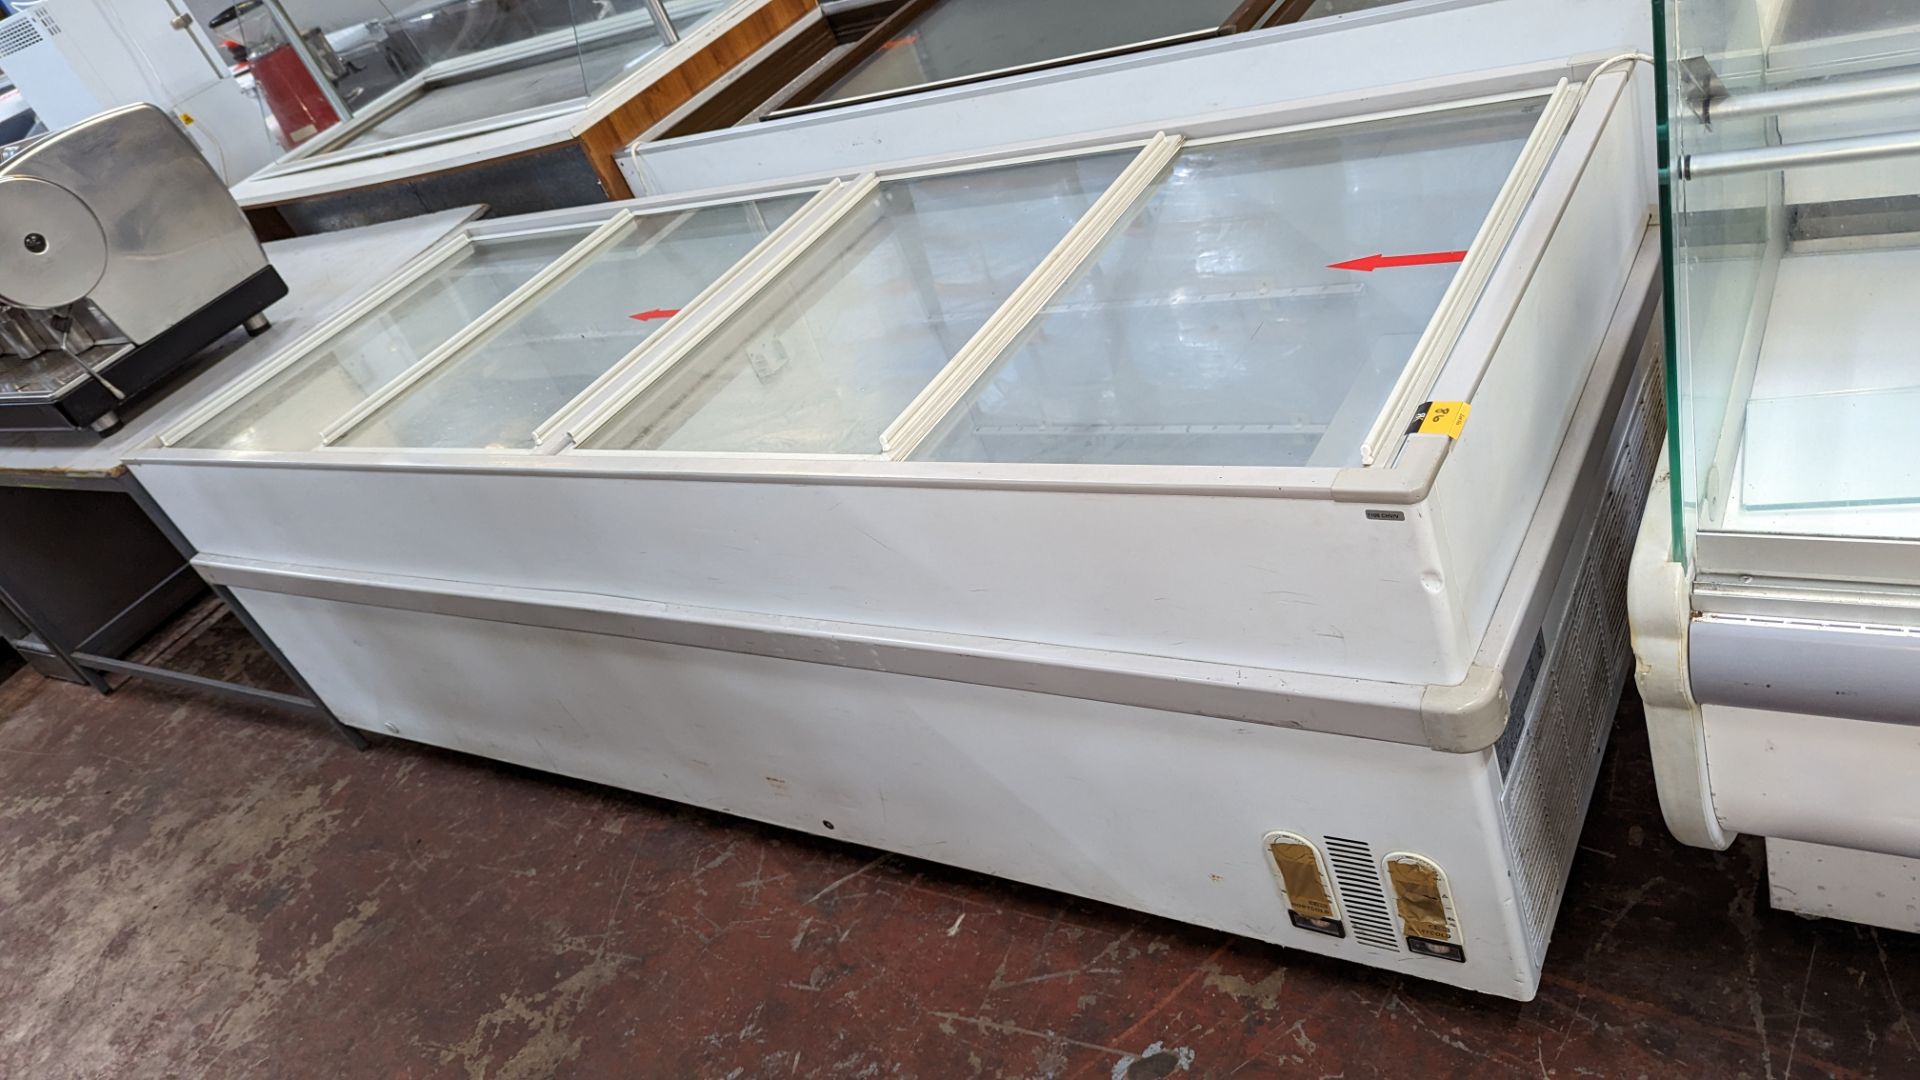 Large clear topped chest freezer measuring approximately 246cm x 91cm